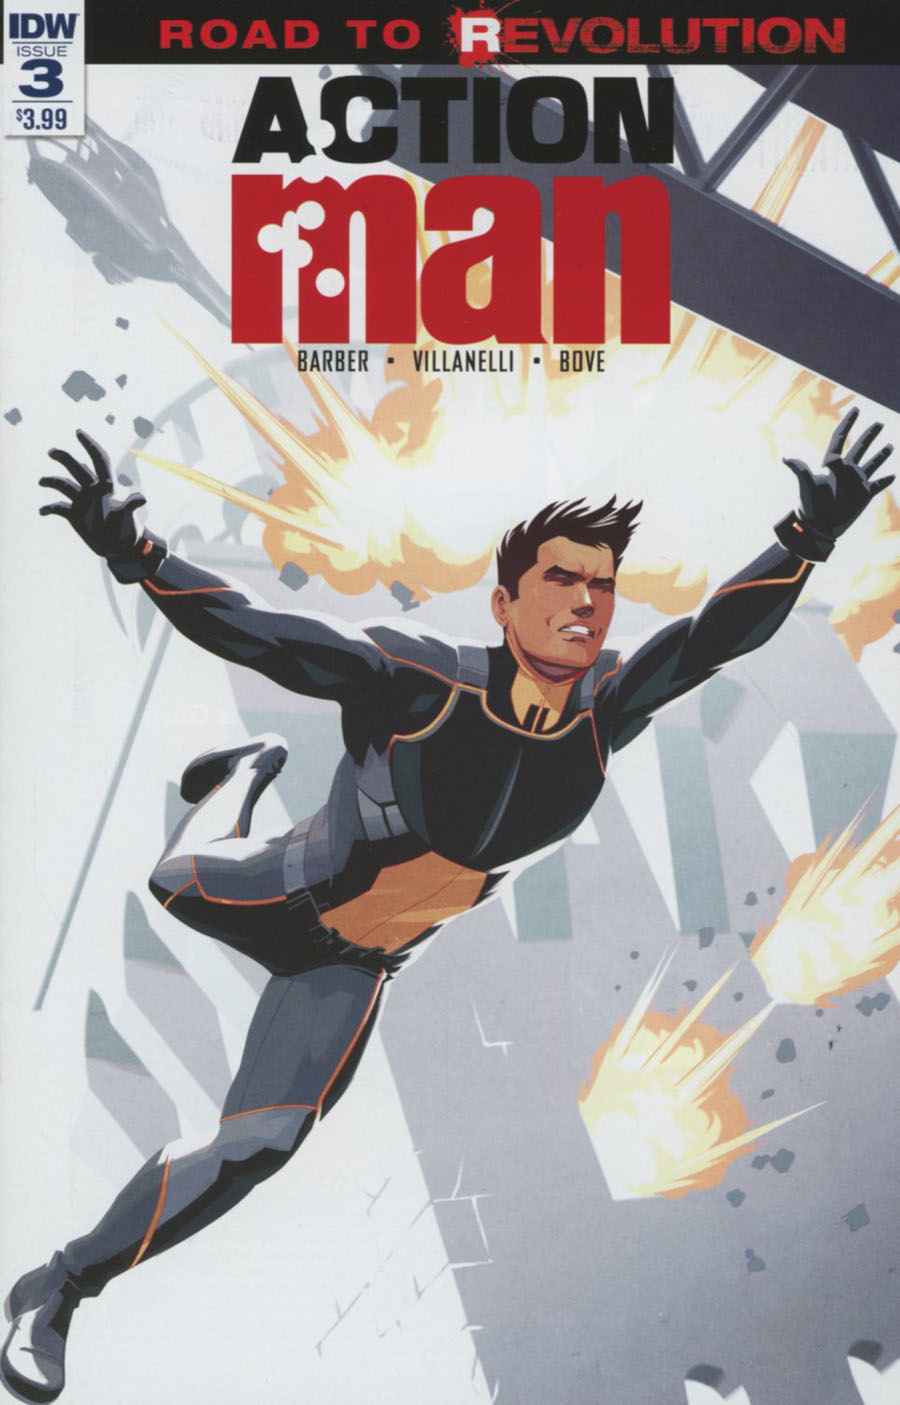 Action Man #3 Cover A Regular Chris Evenhuis Cover (Revolution Tie-In)